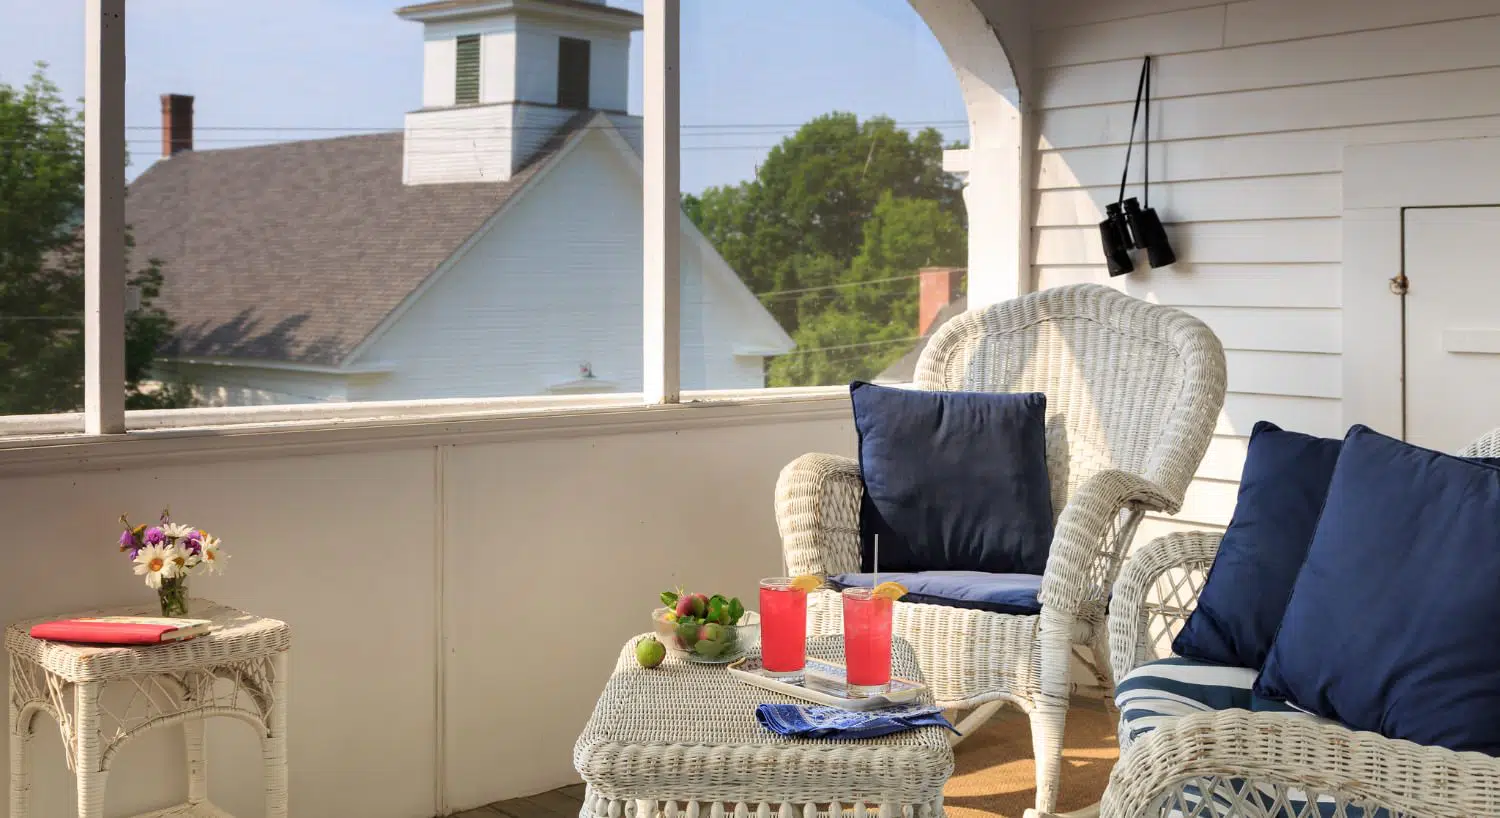 White wicker patio furniture with navy pillow accents on an open patio balcony